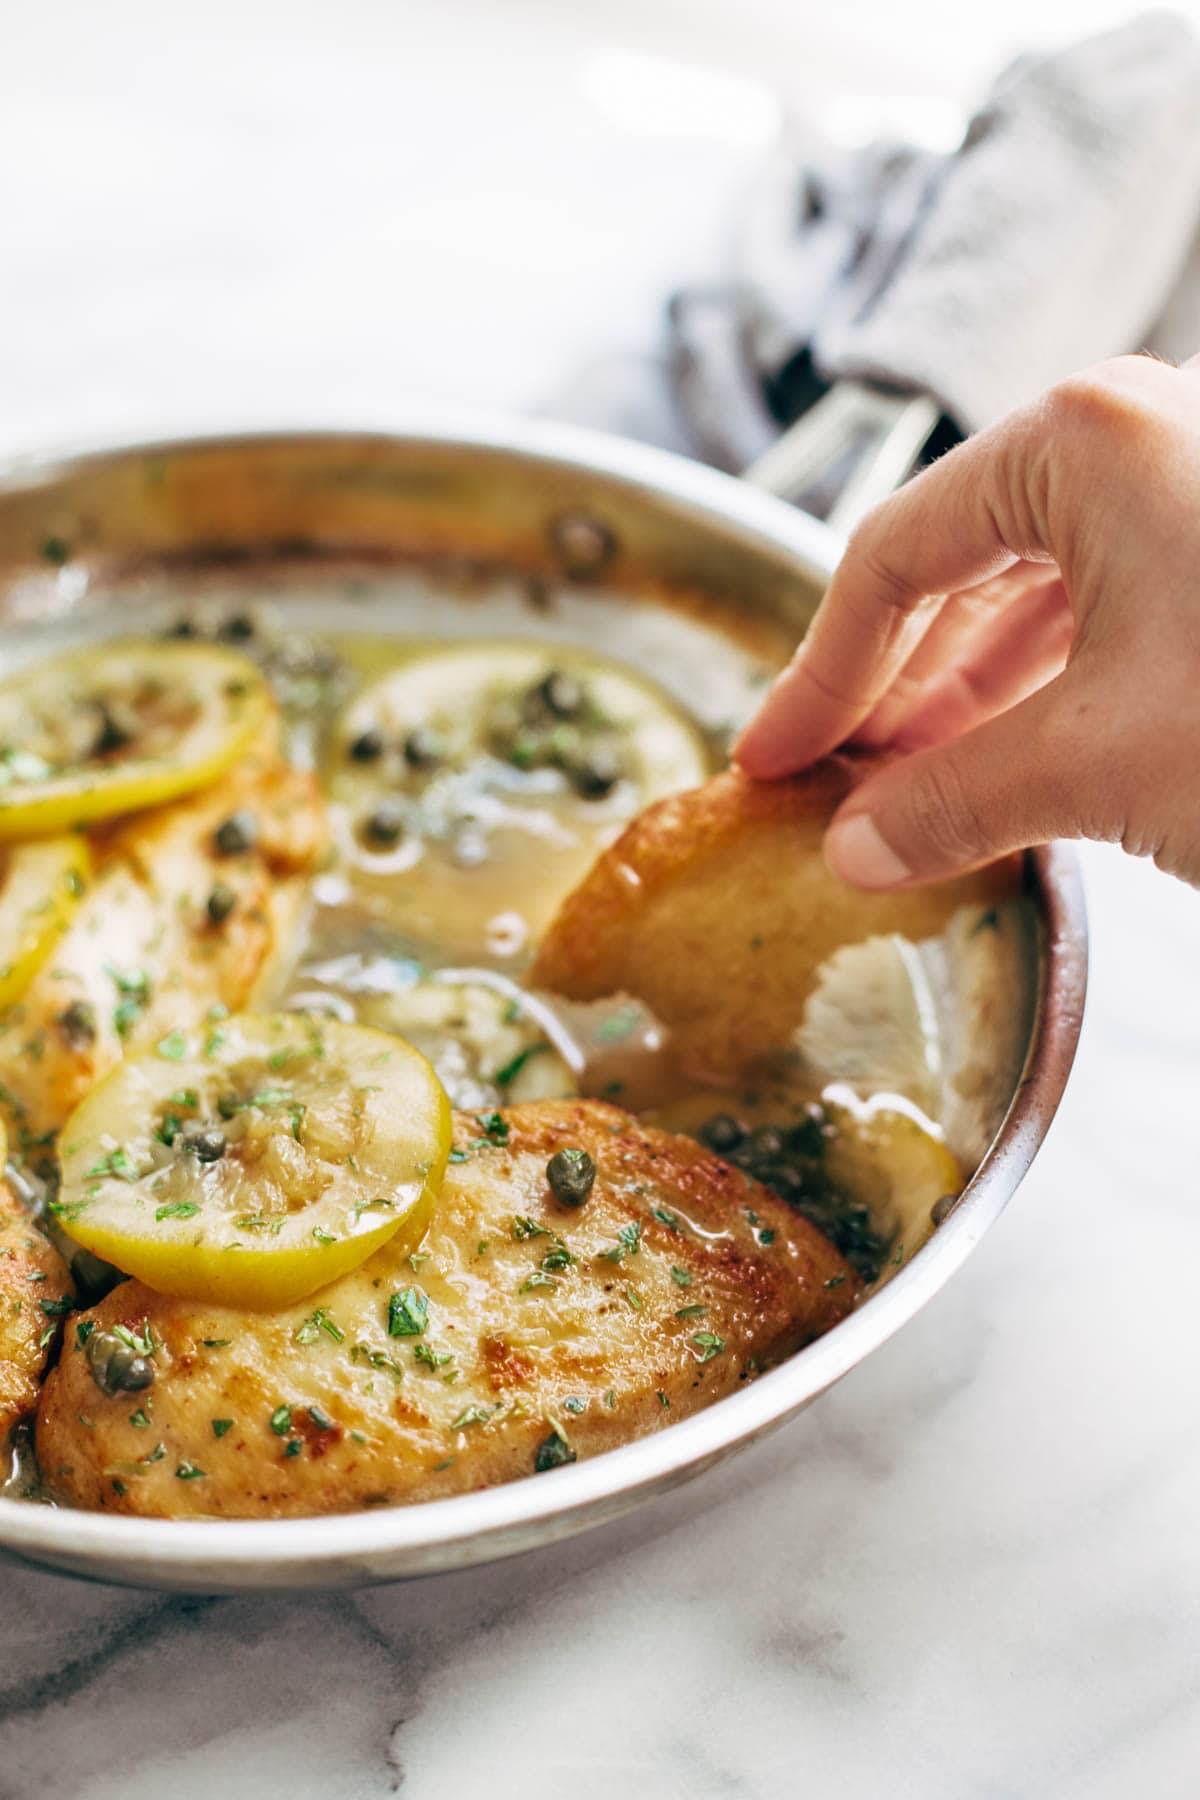 Chicken Piccata - you won't believe how easy this recipe is! Perfect with a green salad and grilled bread for soaking up all the extra sauce. | pinchofyum.com